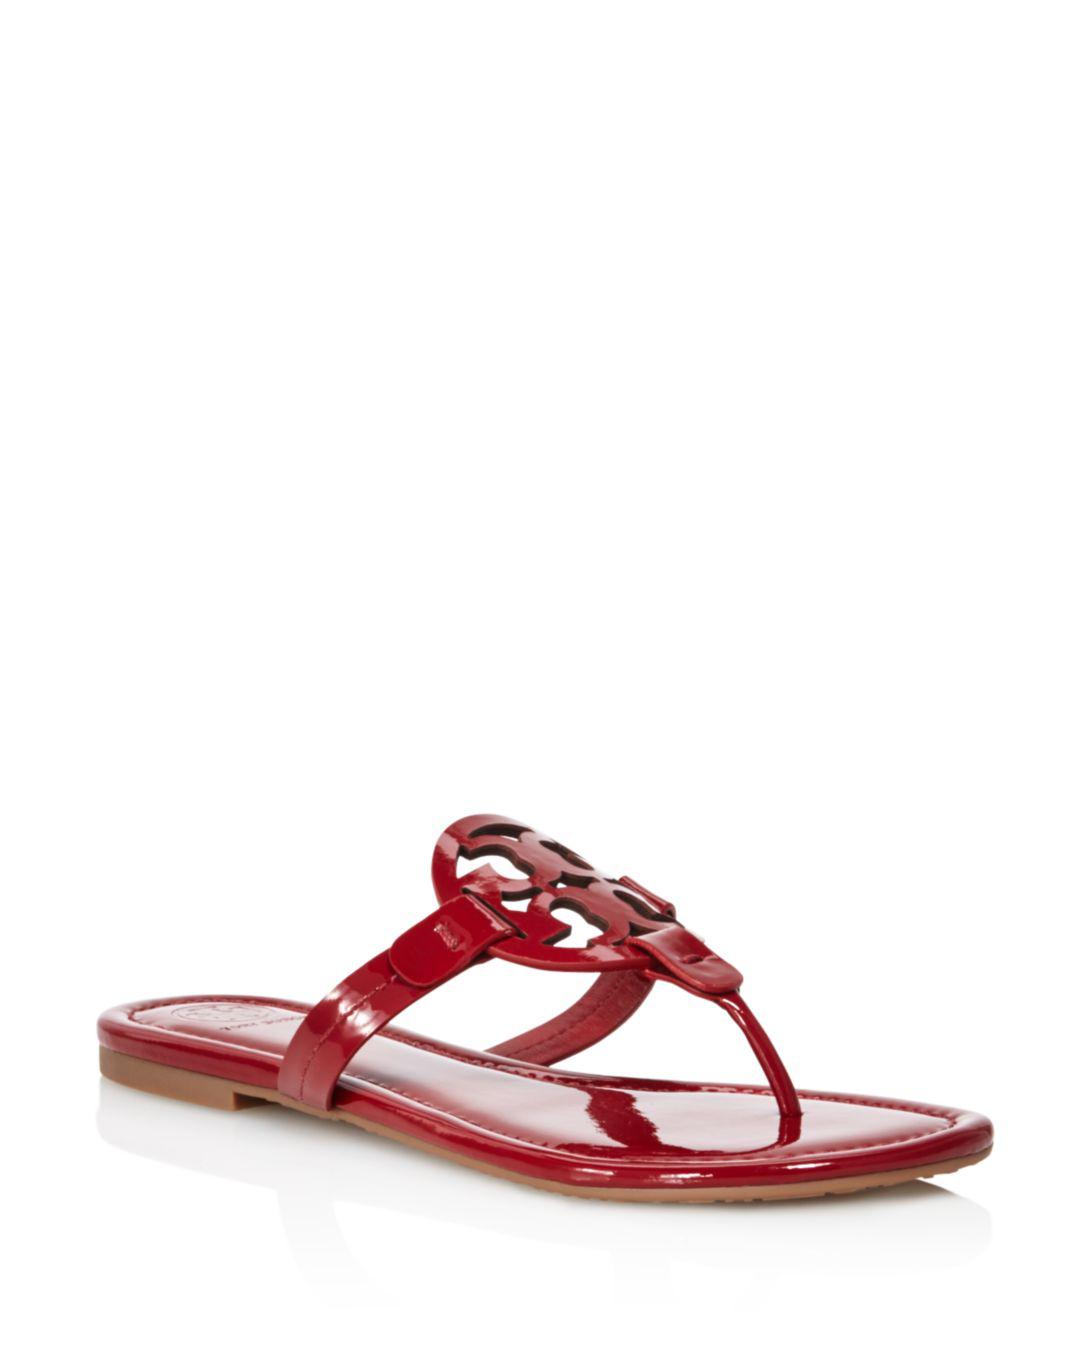 Lyst - Tory Burch Miller Patent Leather Sandals in Red - Save 30. ...